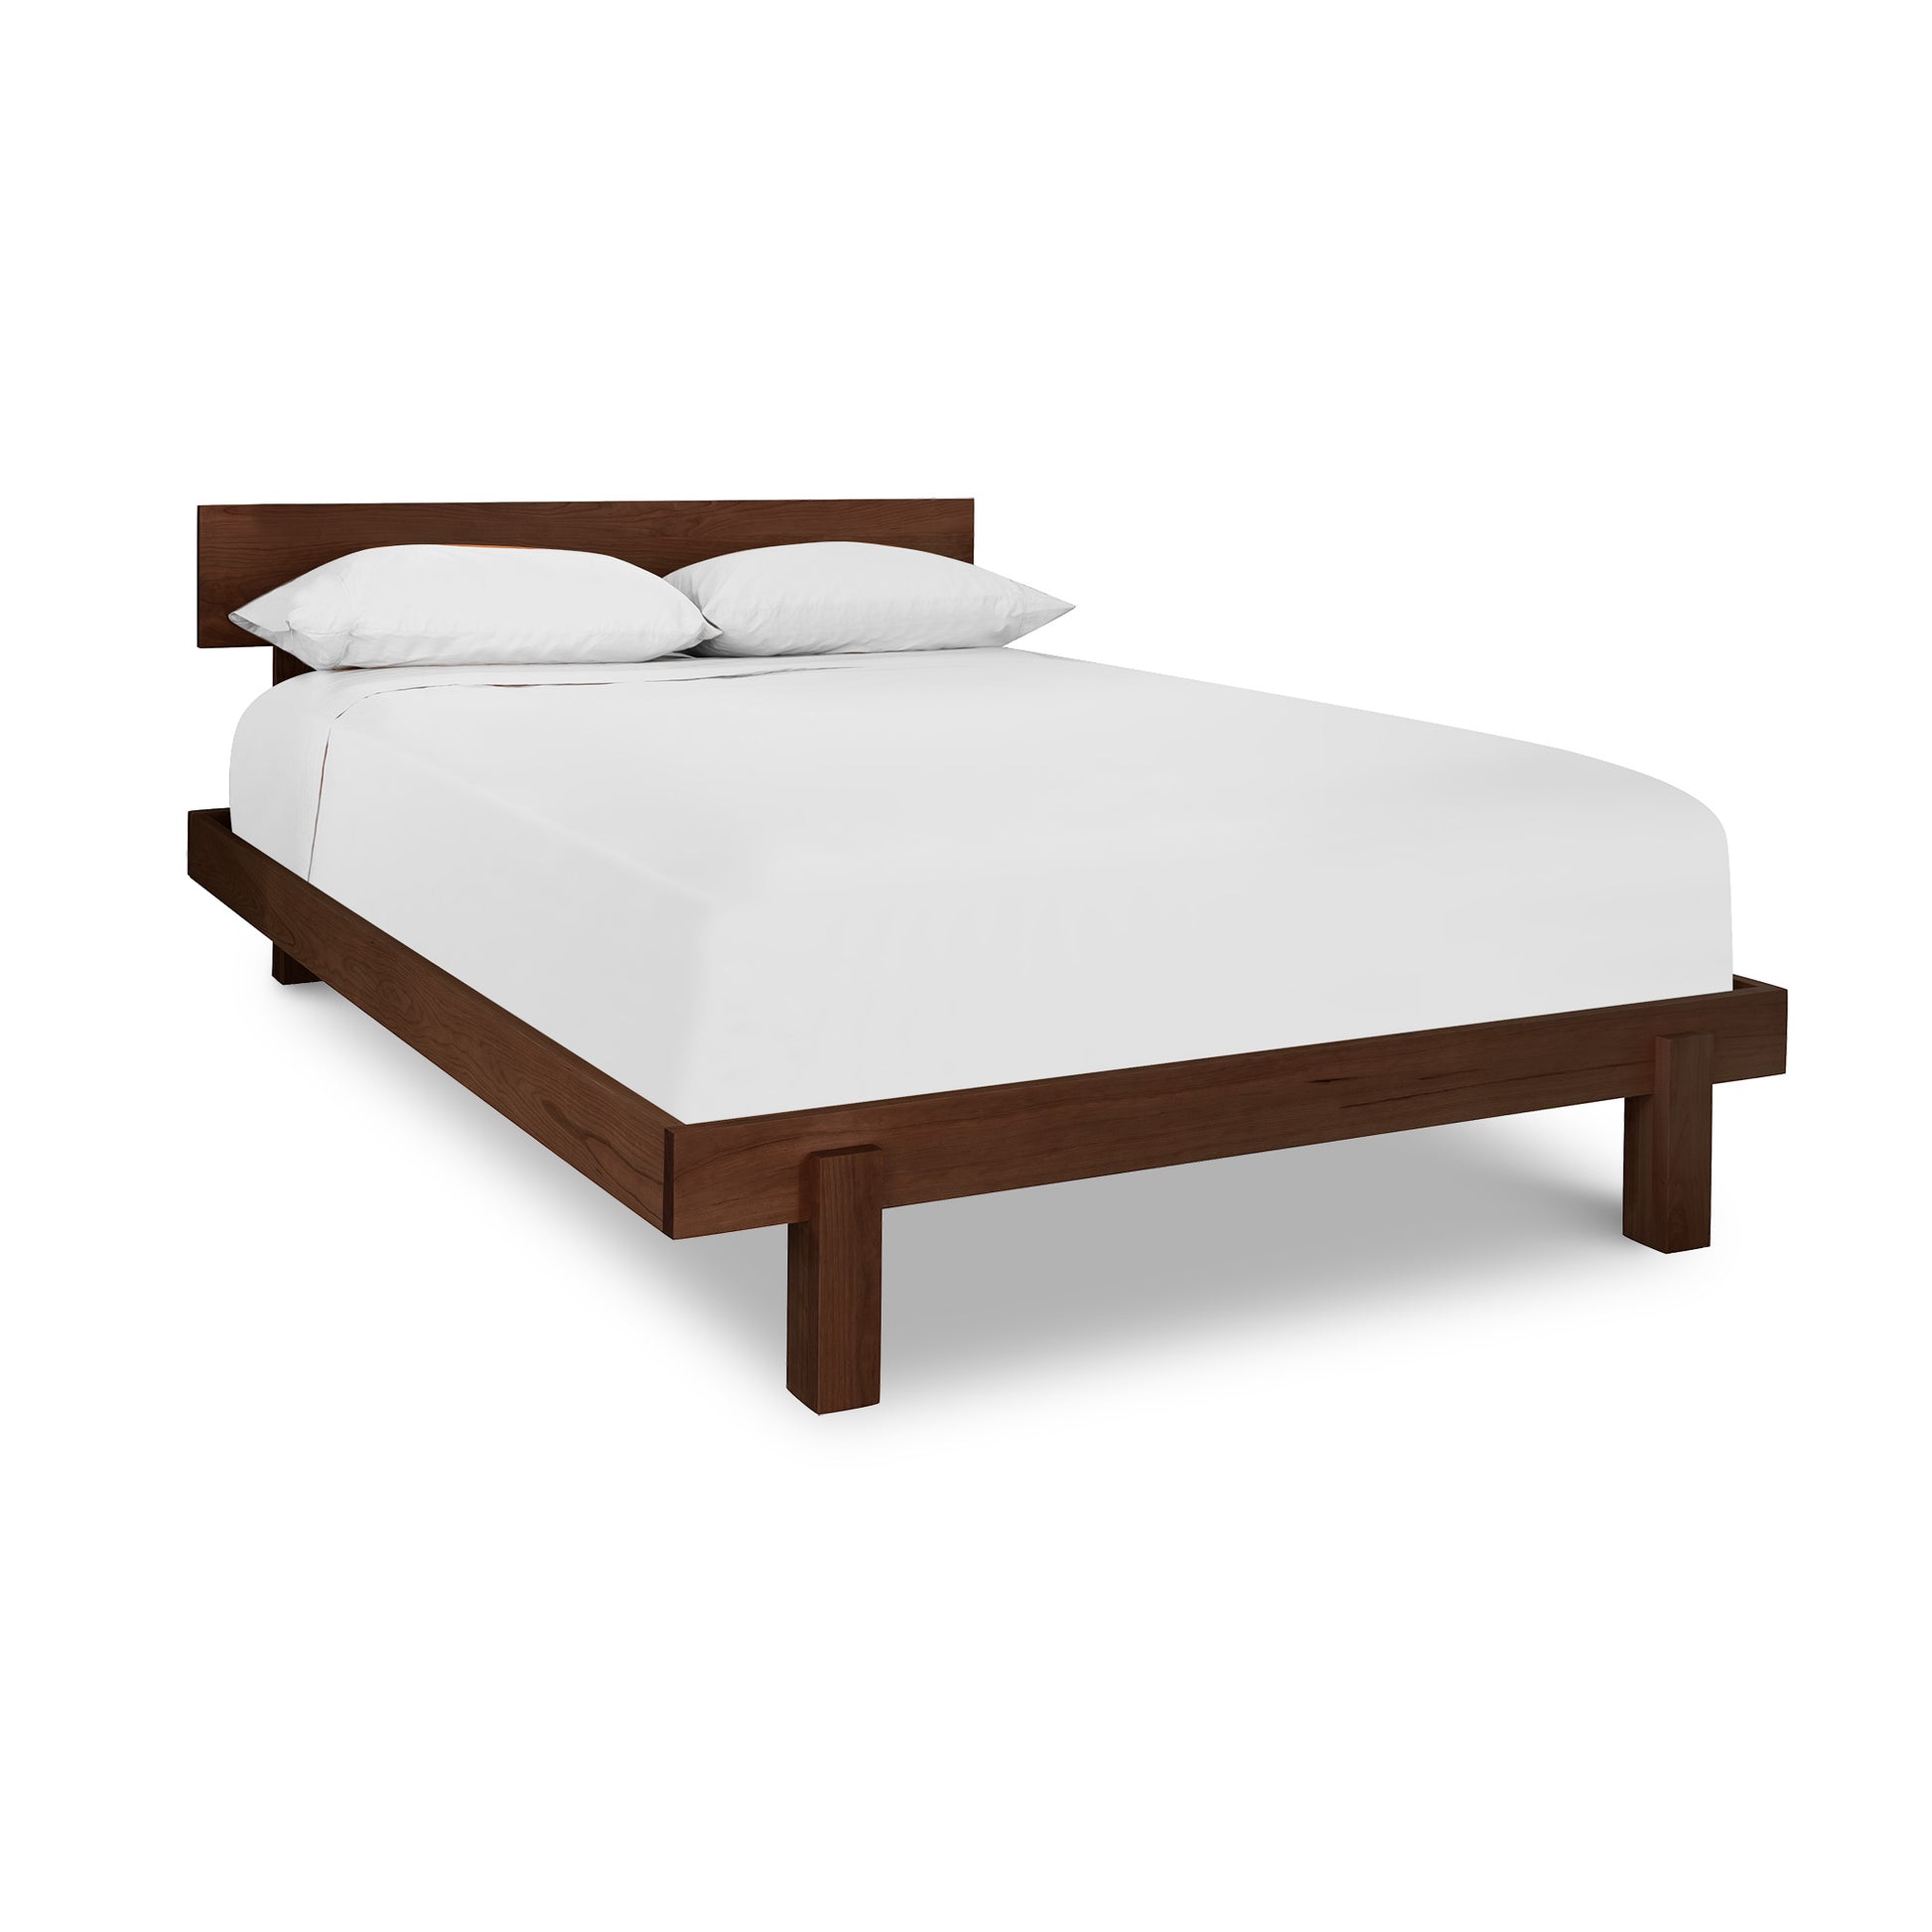 A modern solid wood bed frame known as the Vermont Furniture Designs Kipling Platform Bed with a white mattress and two pillows against a white background.